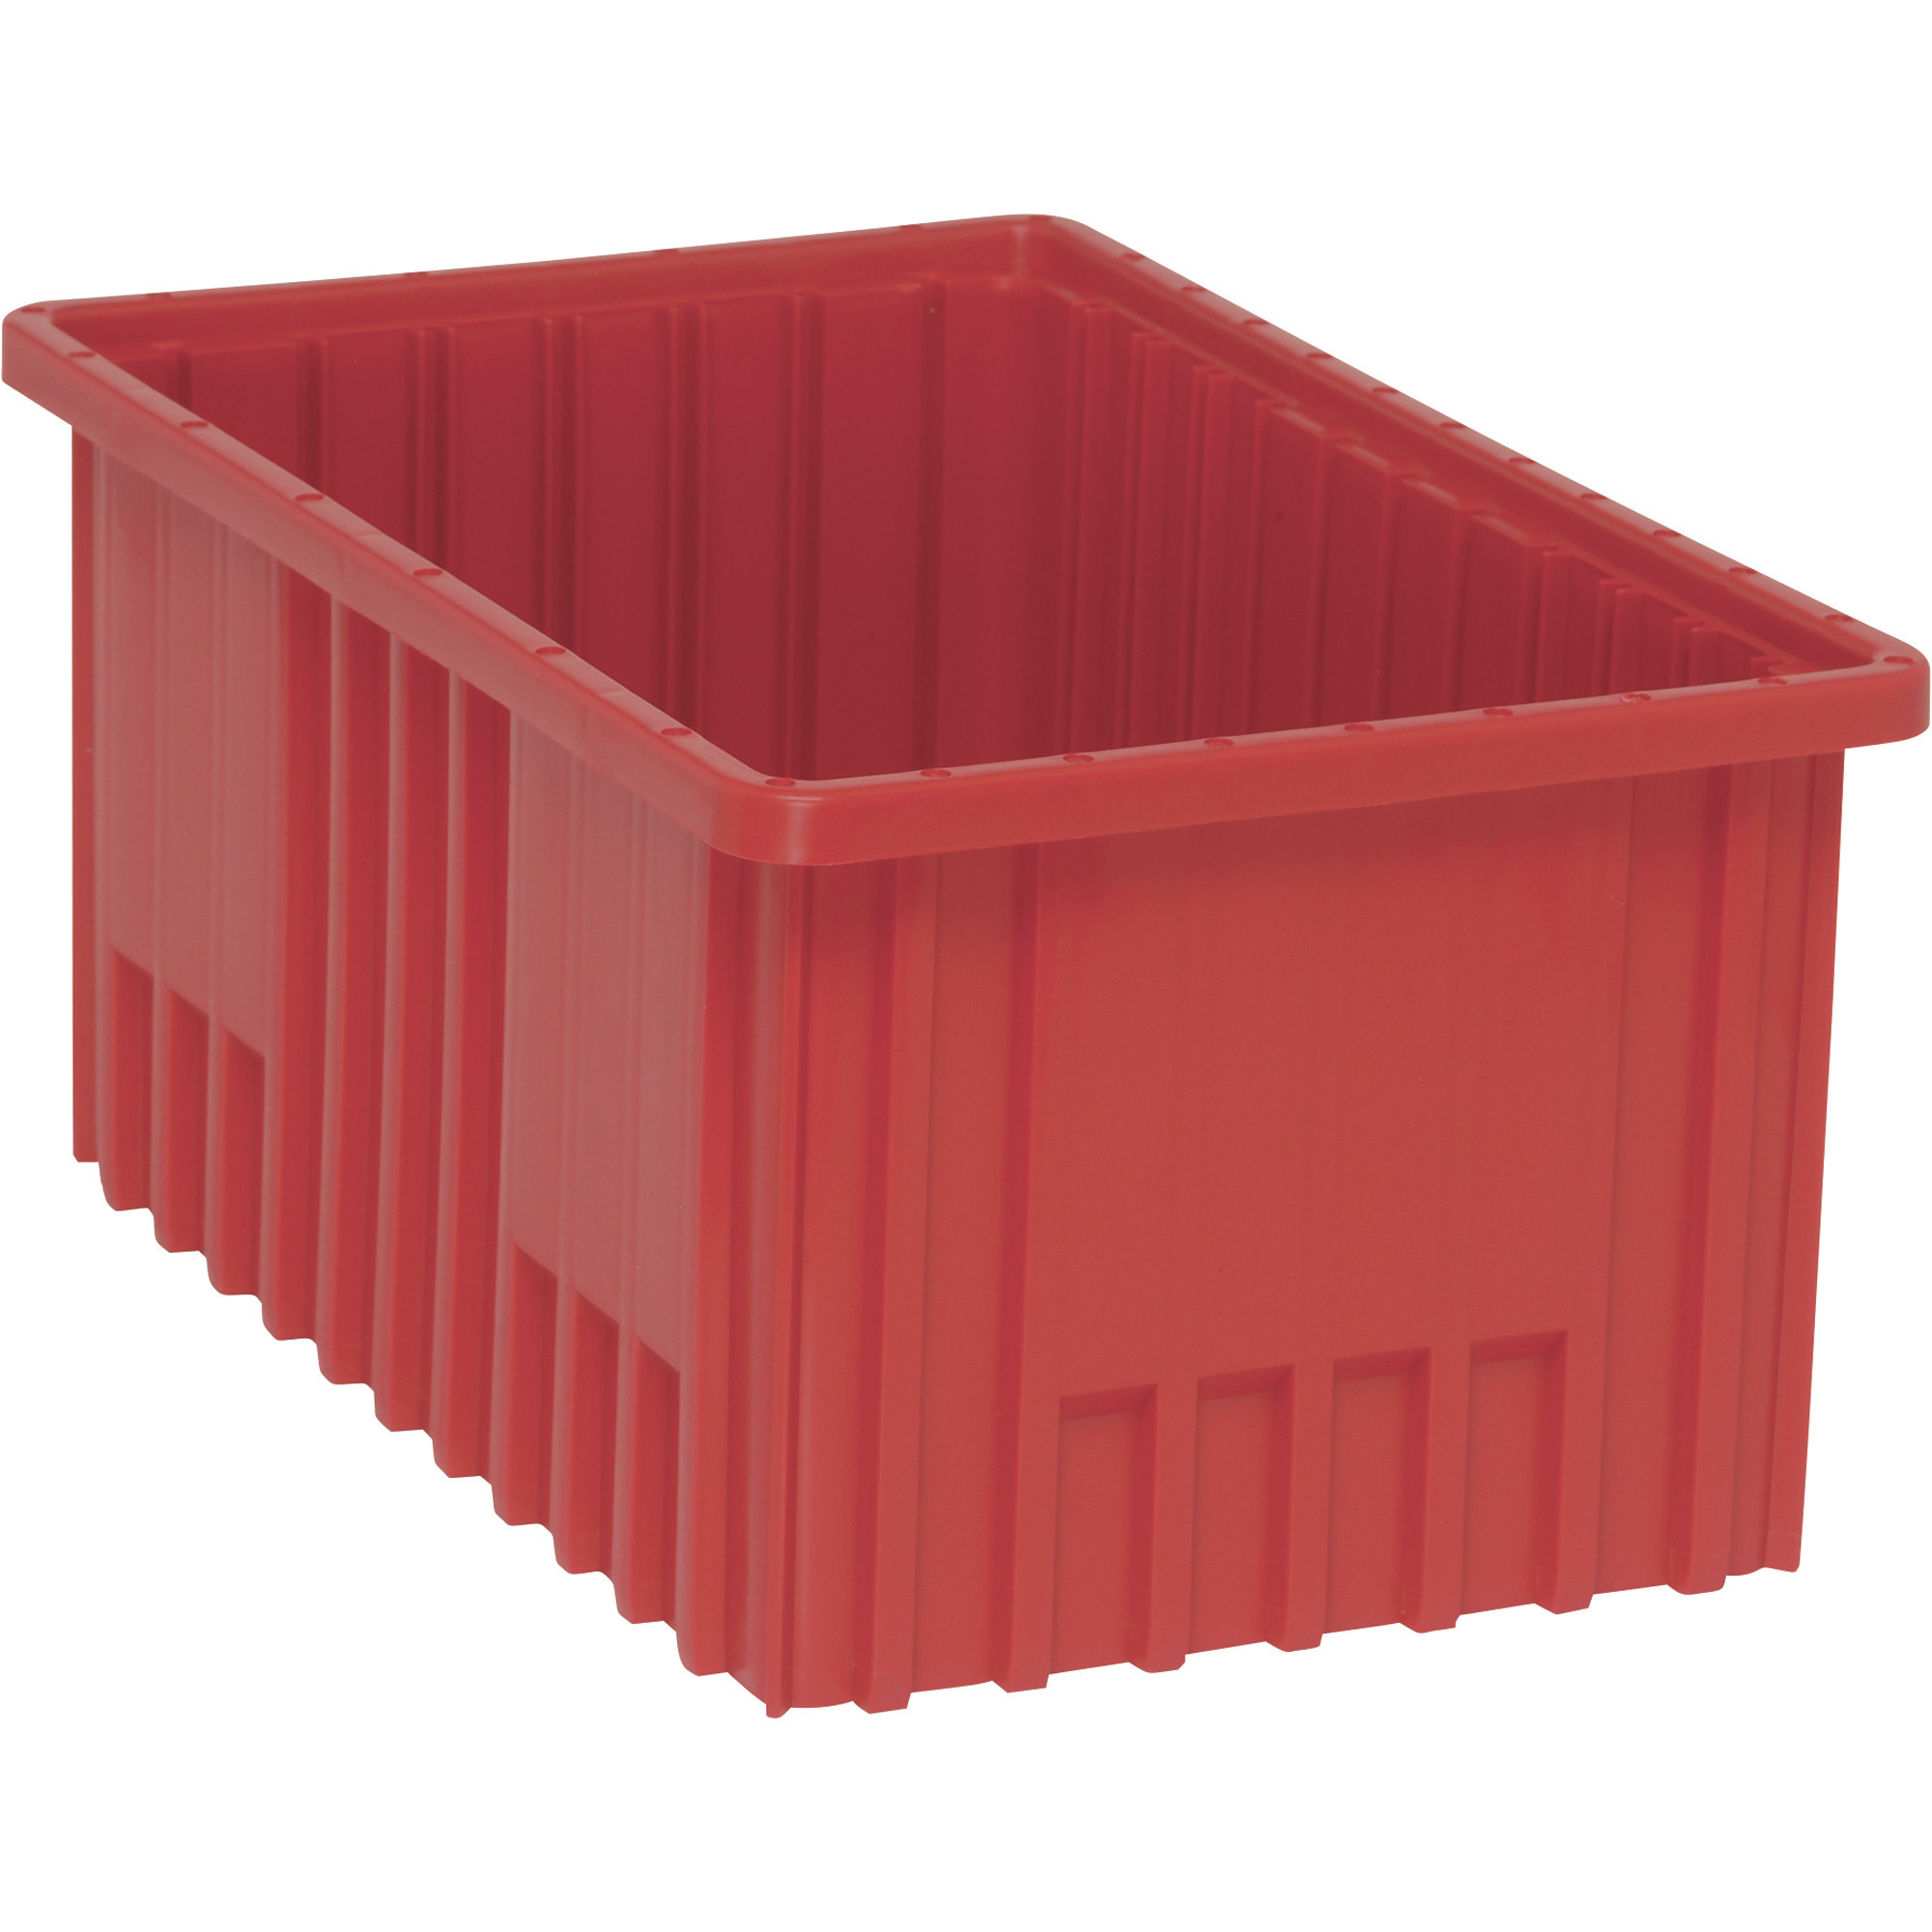 Quantum Storage Dividable Grid Container, 8-Pack, 16 1/2Inch L x 10 7/8Inch W x 8Inch H, Red, Model DG92080RD